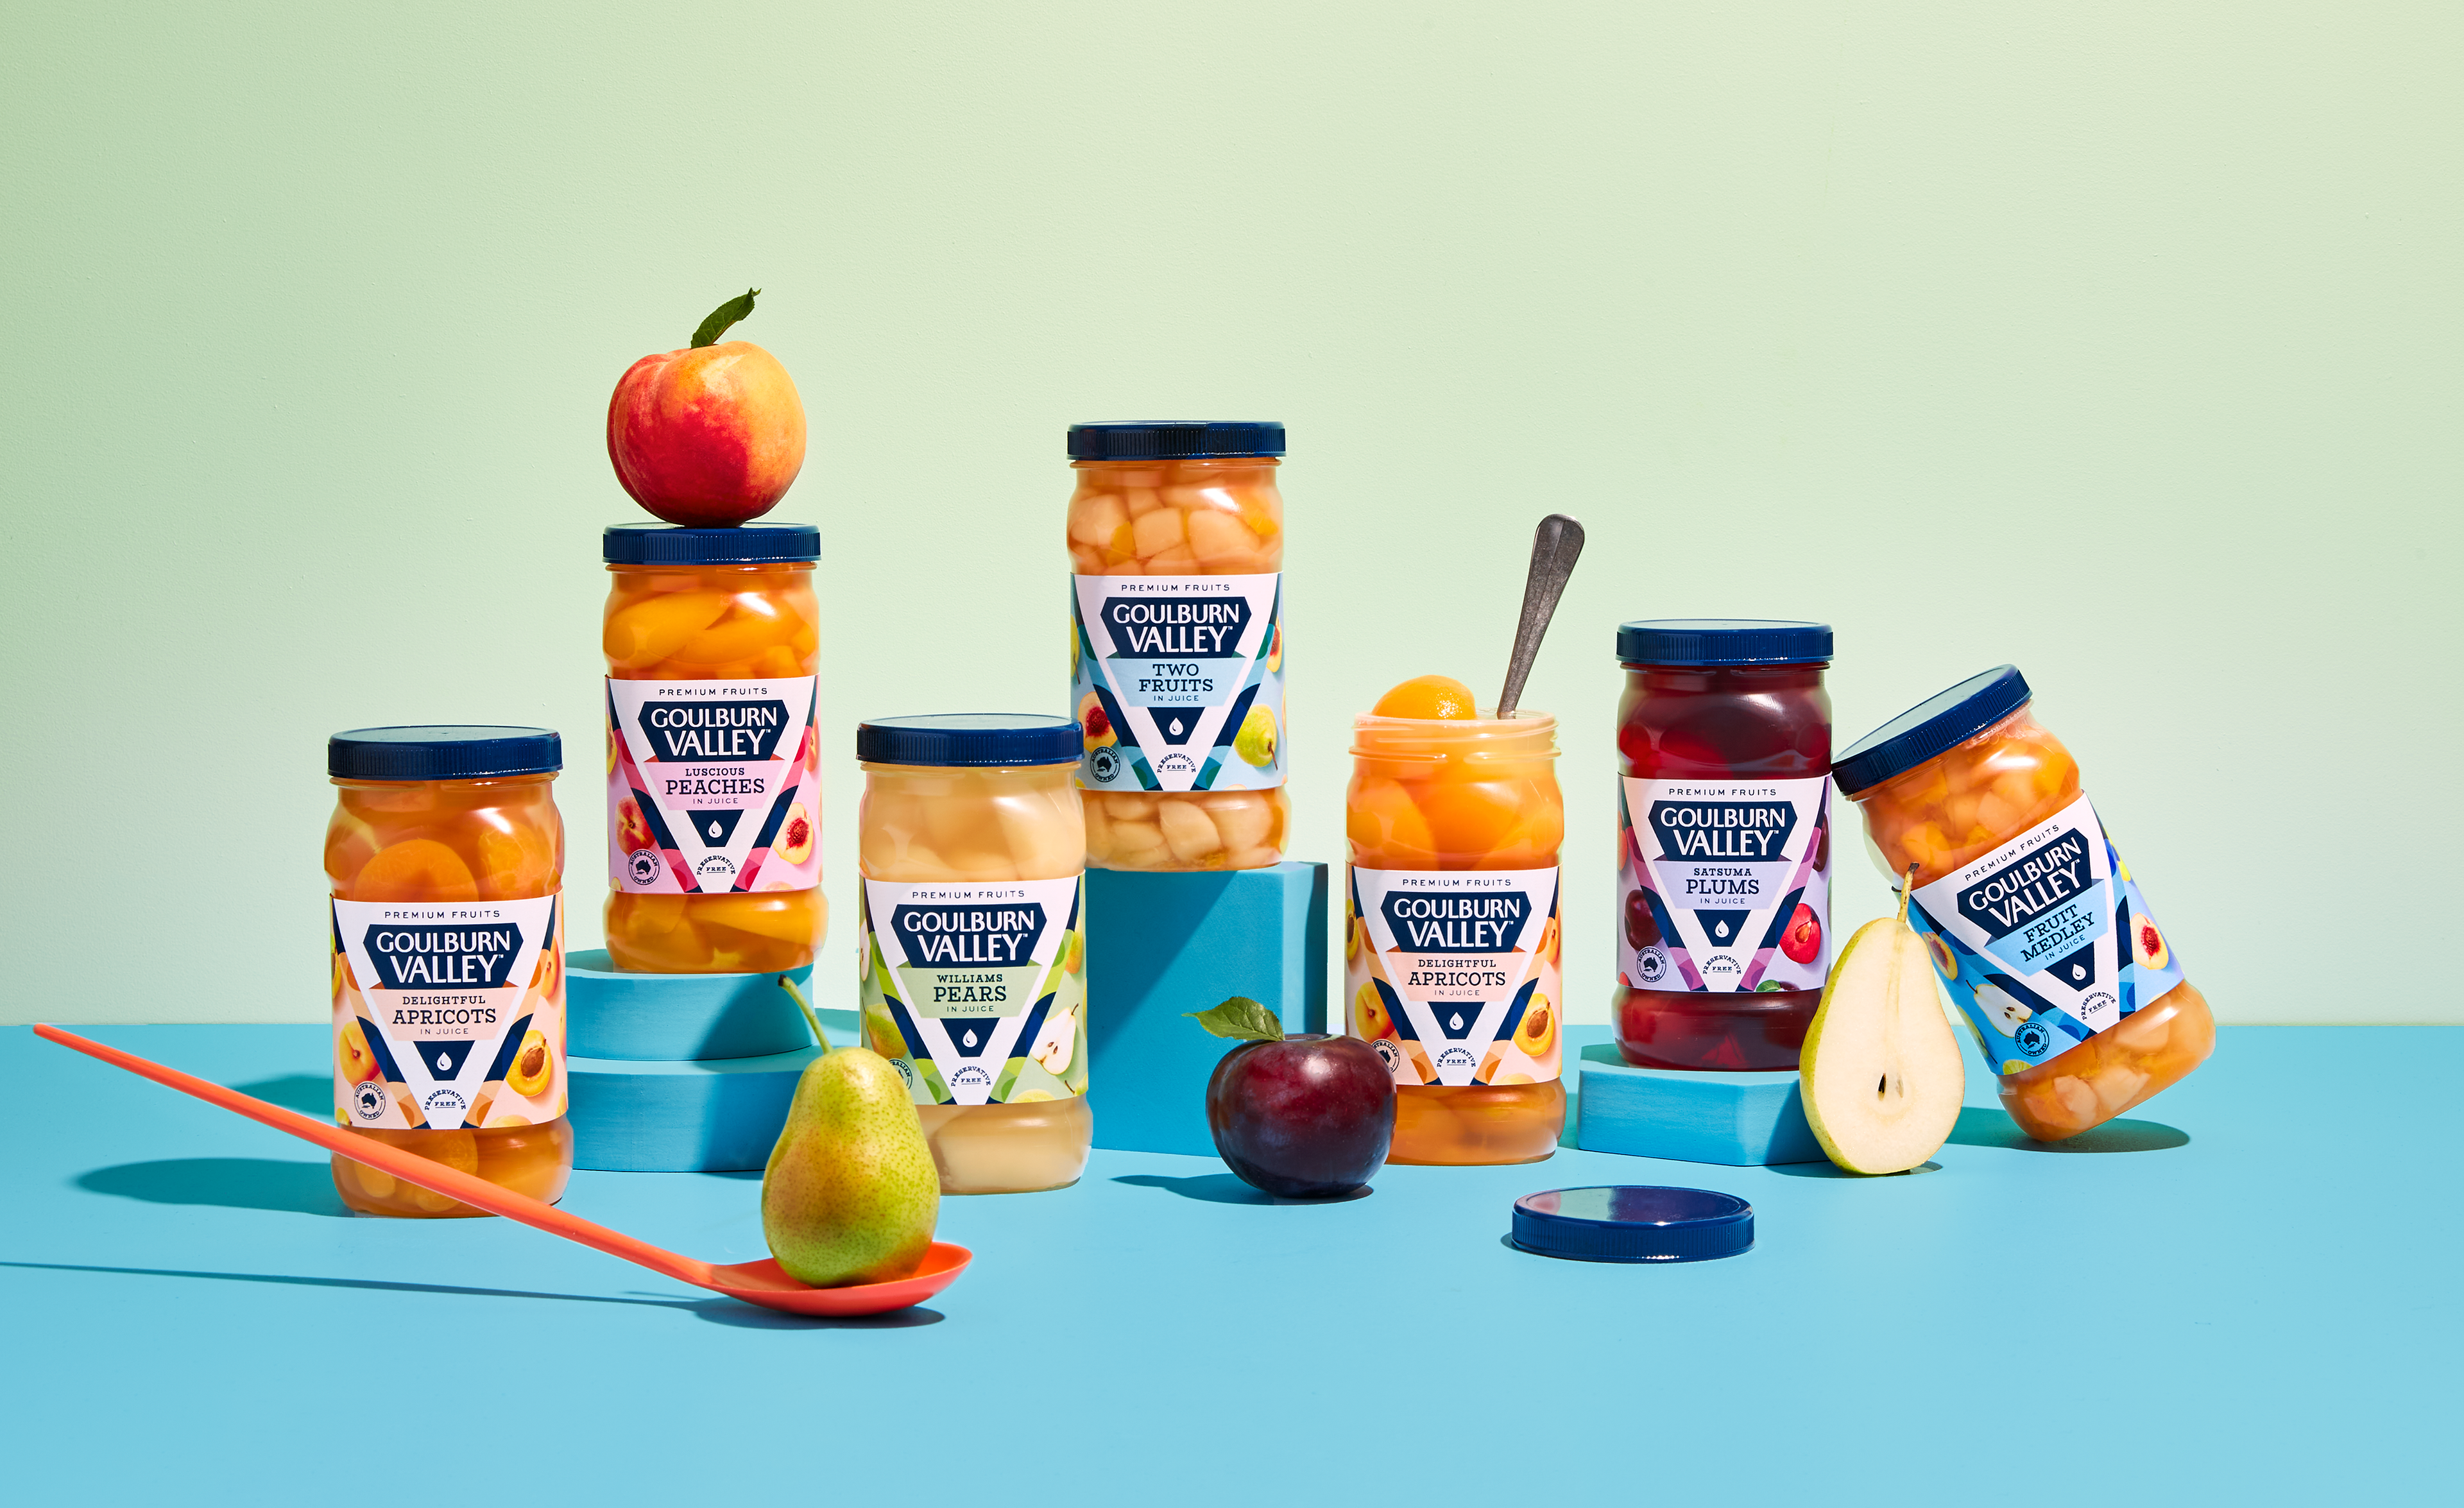 Goulburn Valley fruit product range with colourful bold packaging design by Sydney packaging design agency Our Revolution